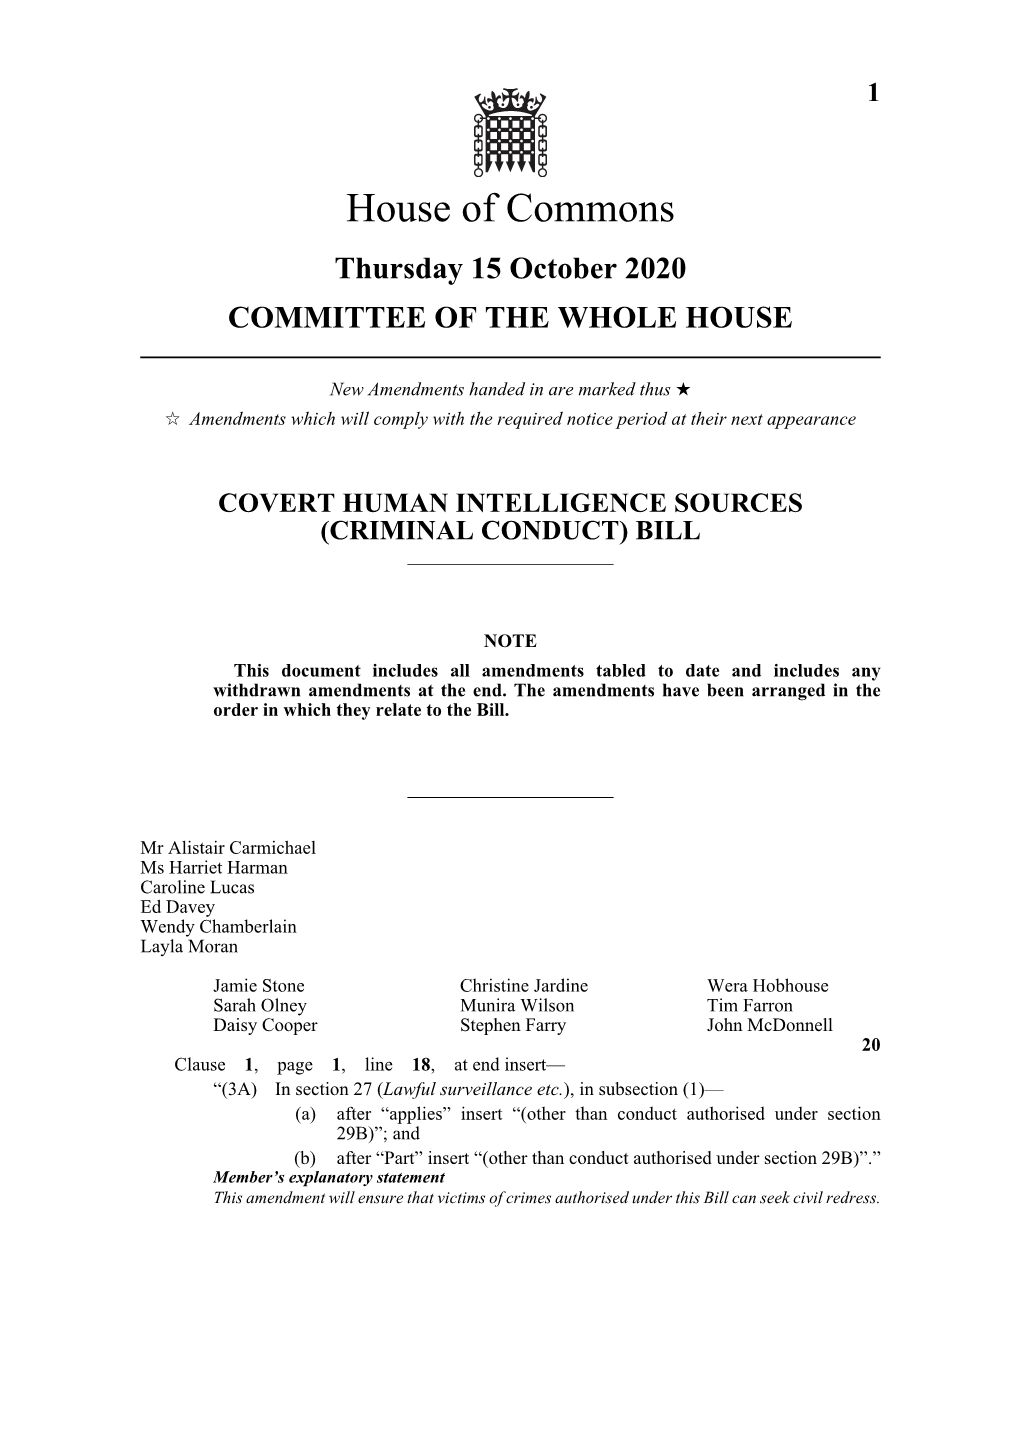 House of Commons Thursday 15 October 2020 COMMITTEE of the WHOLE HOUSE